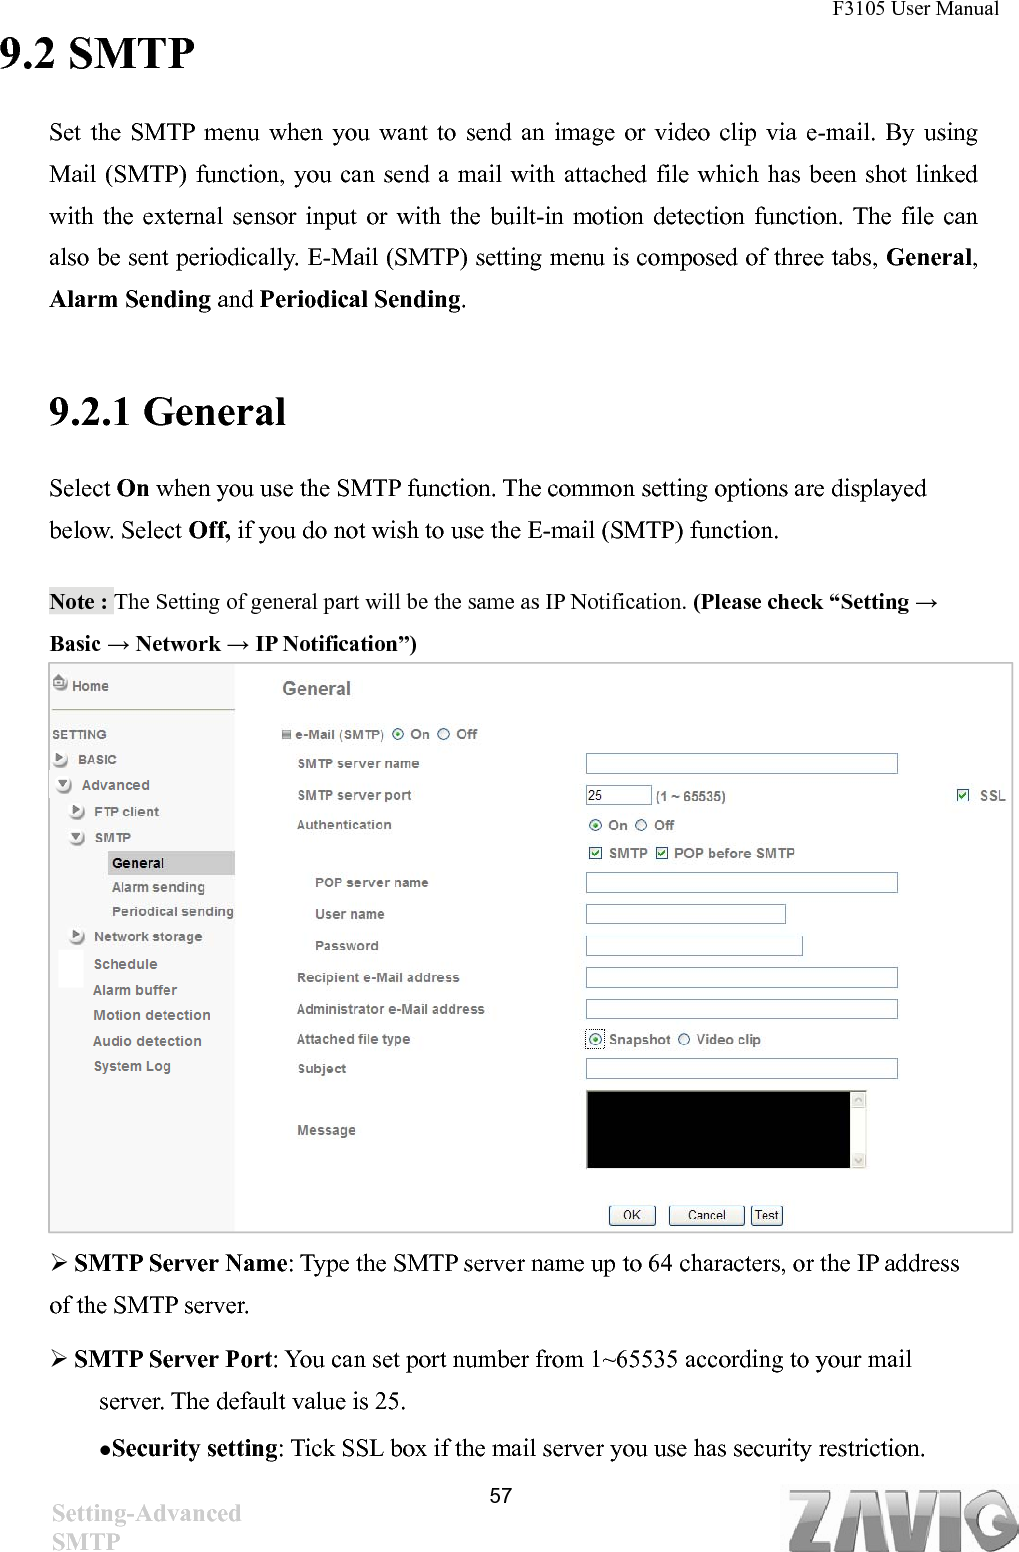 F3105 User Manual   9.2 SMTP Set the SMTP menu when you want to send an image or video clip via e-mail. By using Mail (SMTP) function, you can send a mail with attached file which has been shot linked with the external sensor input or with the built-in motion detection function. The file can also be sent periodically. E-Mail (SMTP) setting menu is composed of three tabs, General, Alarm Sending and Periodical Sending.   9.2.1 General   Select On when you use the SMTP function. The common setting options are displayed below. Select Off, if you do not wish to use the E-mail (SMTP) function. Note : The Setting of general part will be the same as IP Notification. (Please check “Setting → Basic → Network → IP Notification”)            SMTP Server Name: Type the SMTP server name up to 64 characters, or the IP address of the SMTP server.  SMTP Server Port: You can set port number from 1~65535 according to your mail server. The default value is 25. Security setting: Tick SSL box if the mail server you use has security restriction.  57Setting-Advanced SMTP 